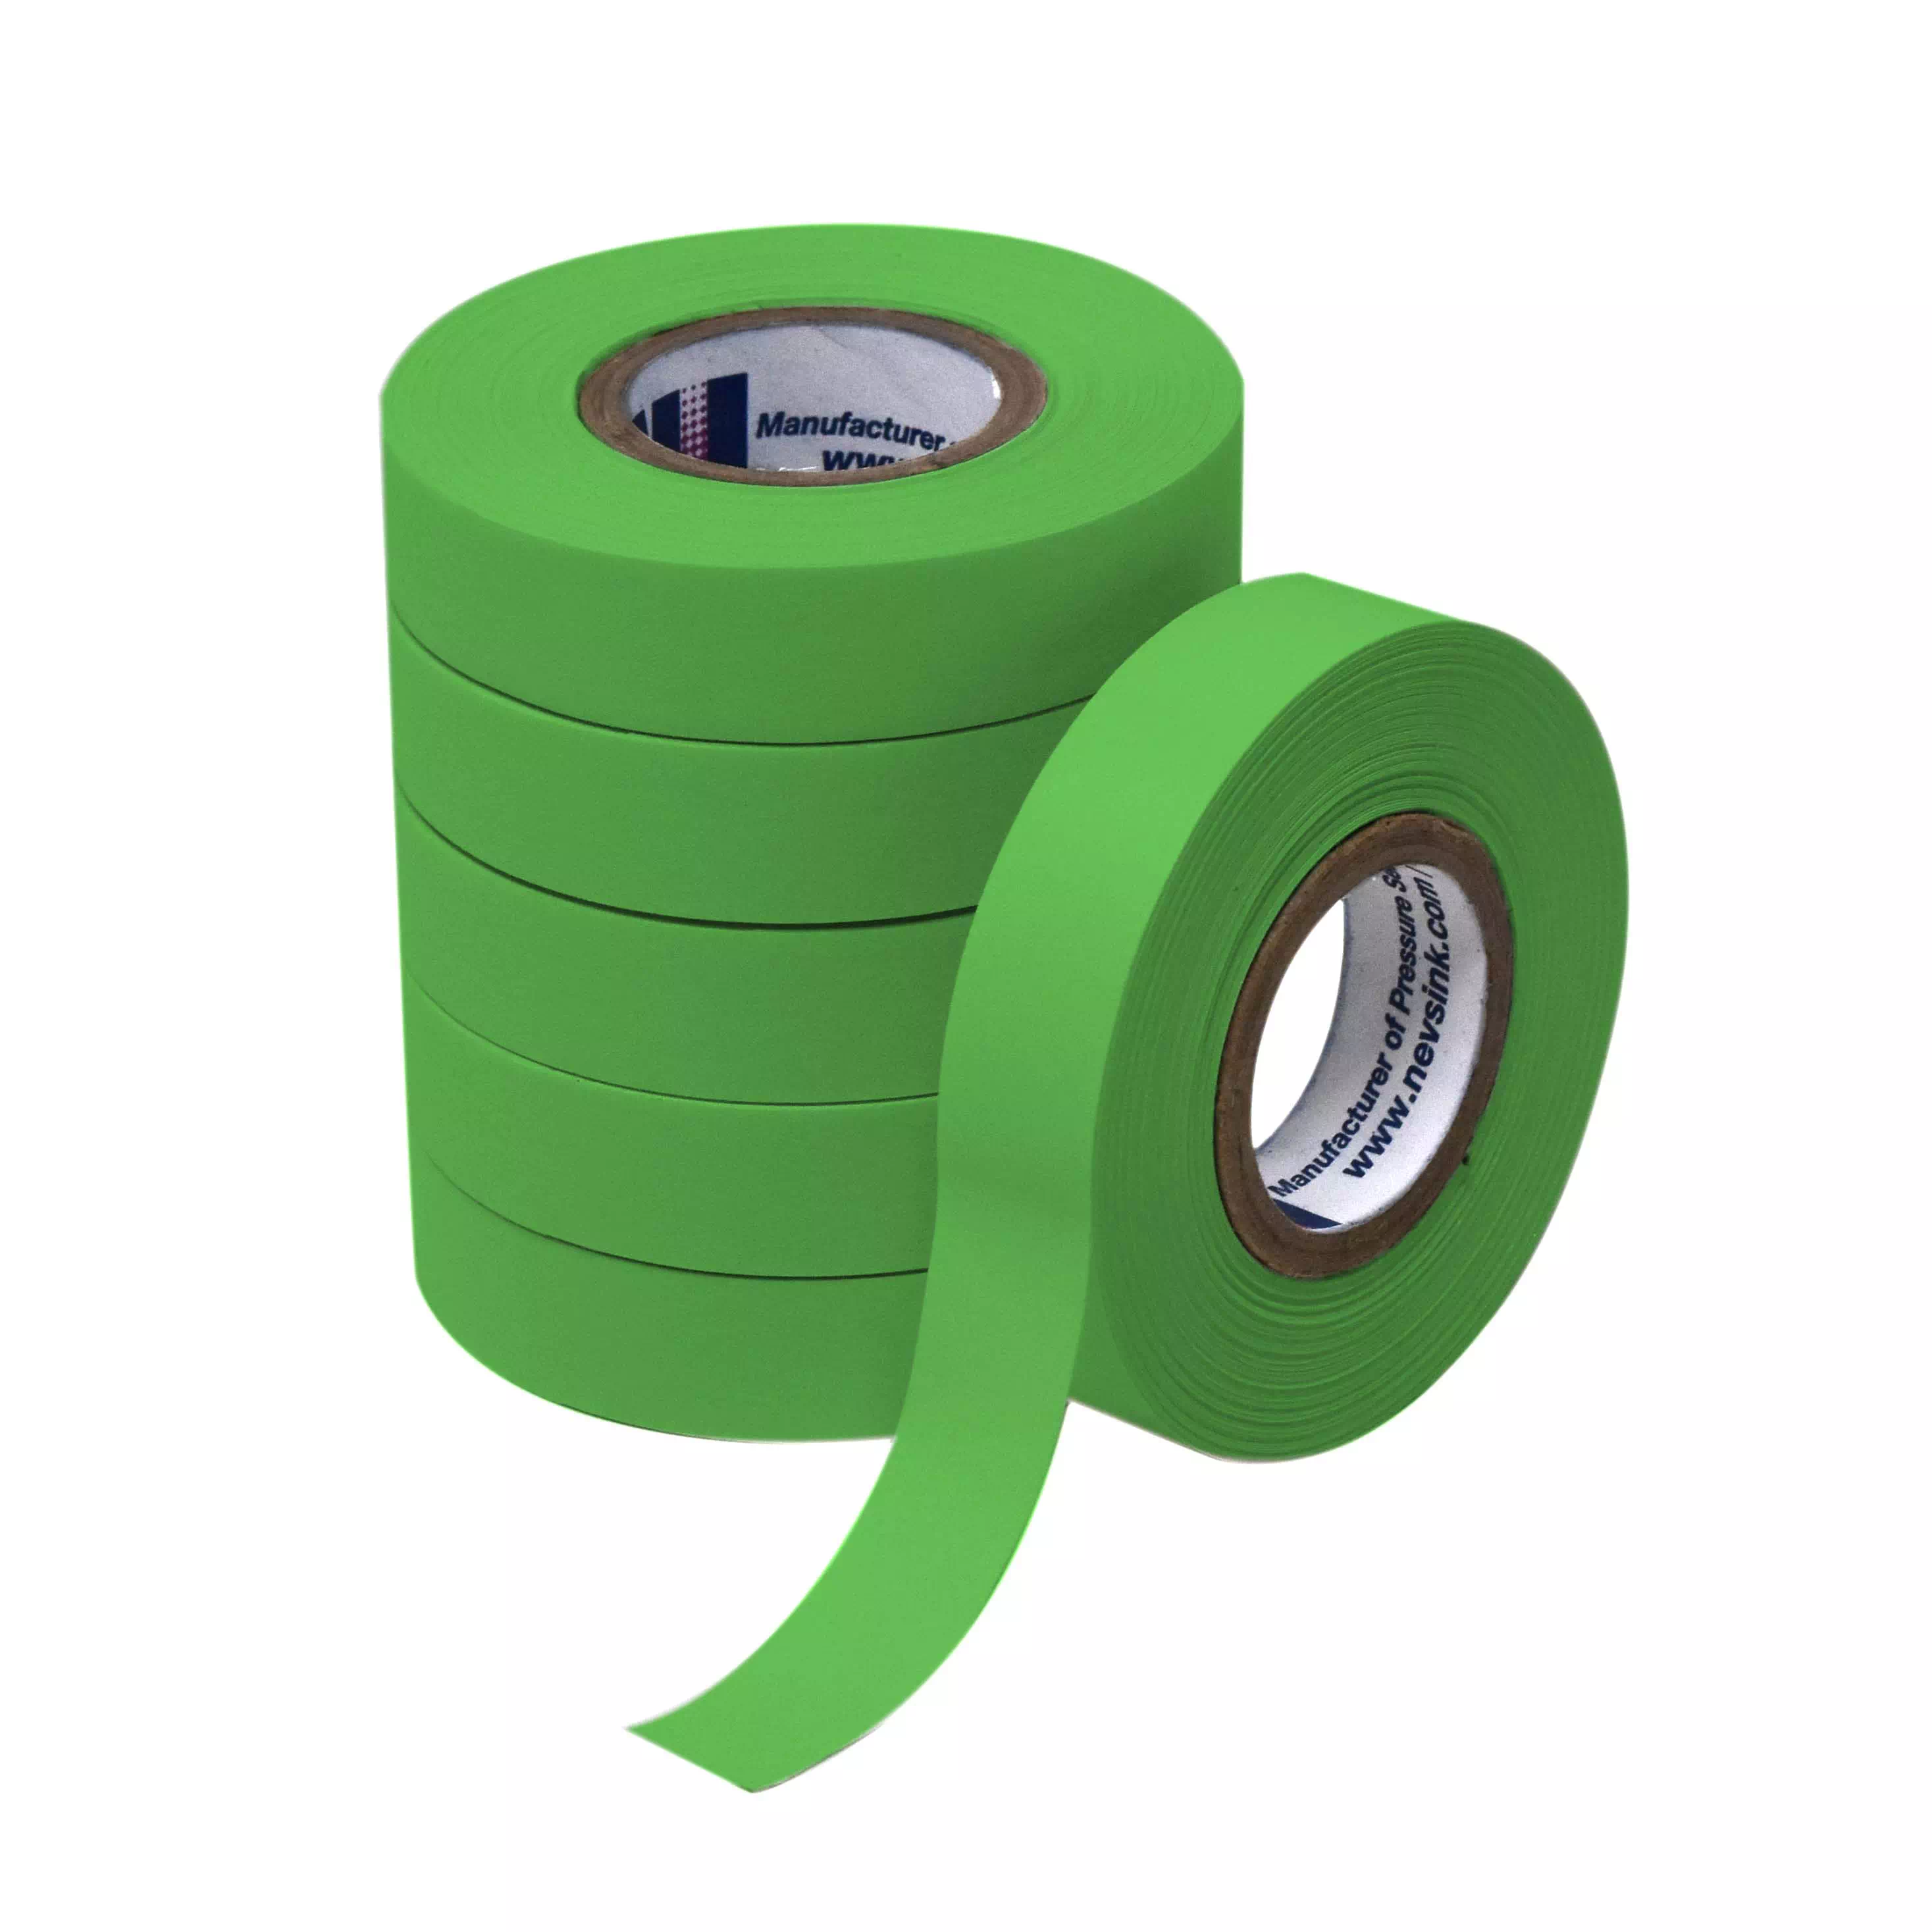 1/2" wide x 500" Green Labeling Tape